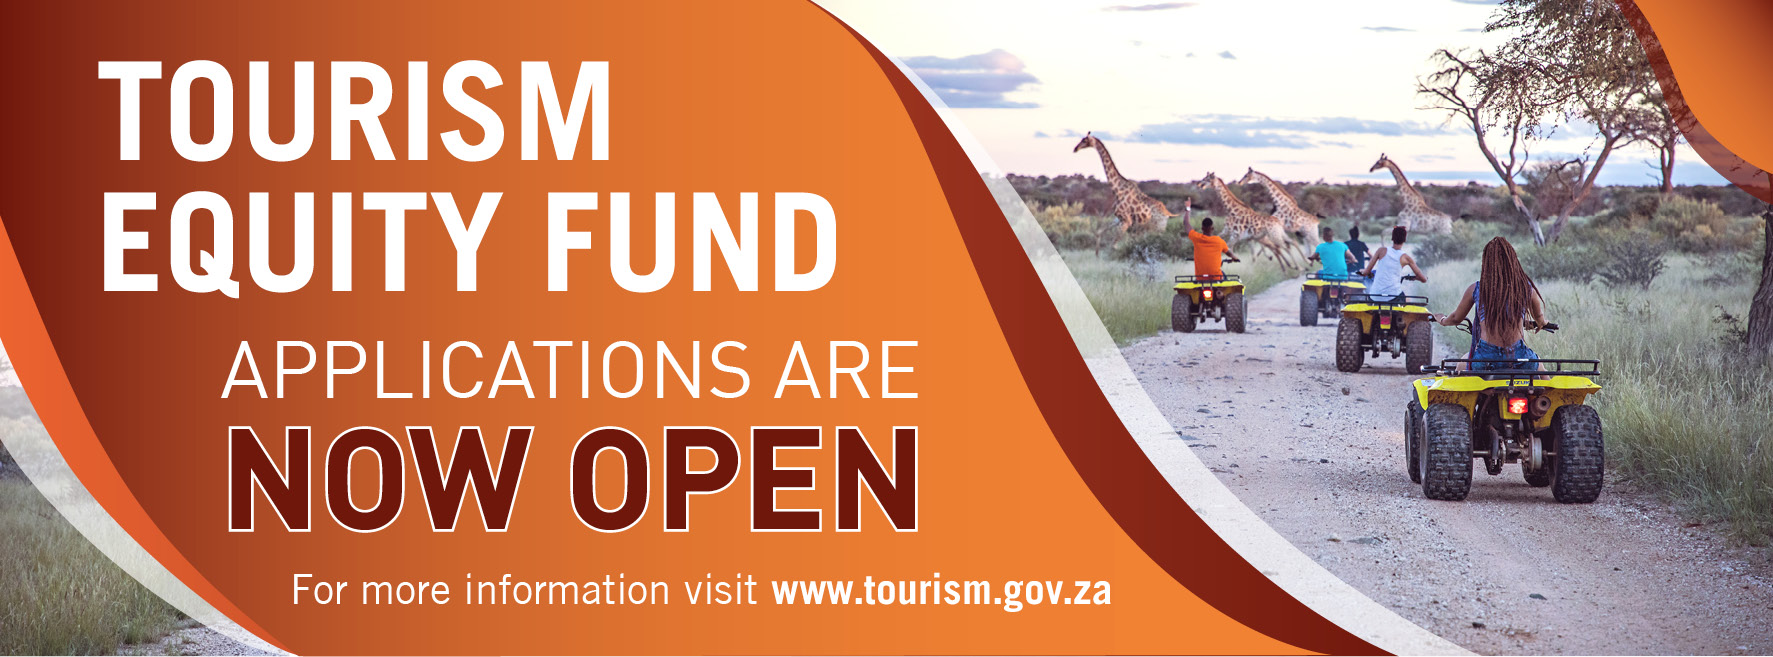 Minister Kubayi-Ngubane met with AfriForum and Solidarity on transformation and the Tourism Equity Fund